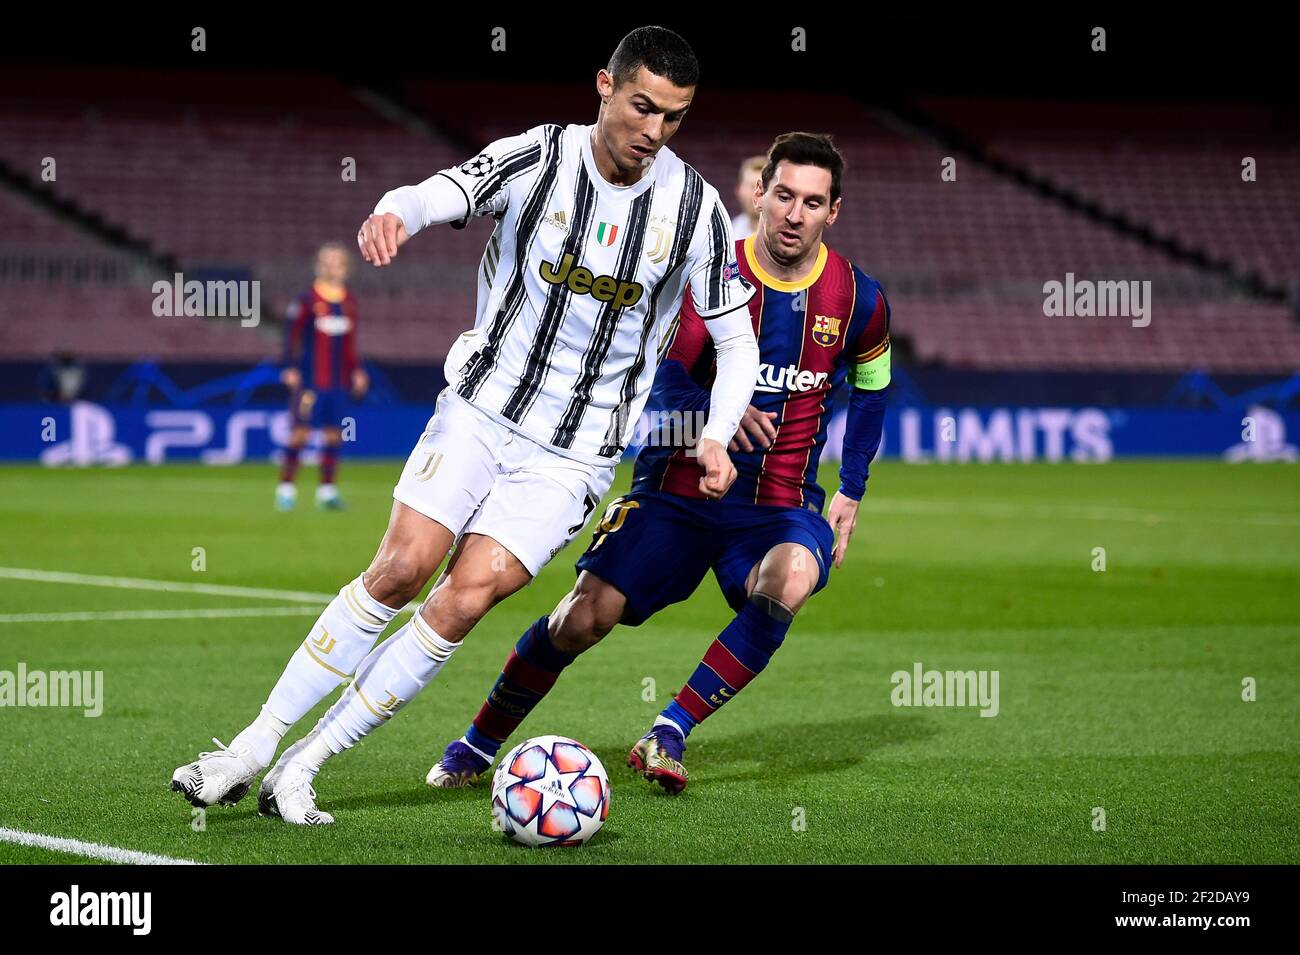 Barcelona, Spain - 08 December, 2020: Cristiano Ronaldo (L) of Juventus FC is challenged by Lionel Messi of FC Barcelona during the UEFA Champions League Group G football match between FC Barcelona and Juventus. Juventus FC won 3-0 over FC Barcelona. Credit: Nicolò Campo/Alamy Live News Stock Photo